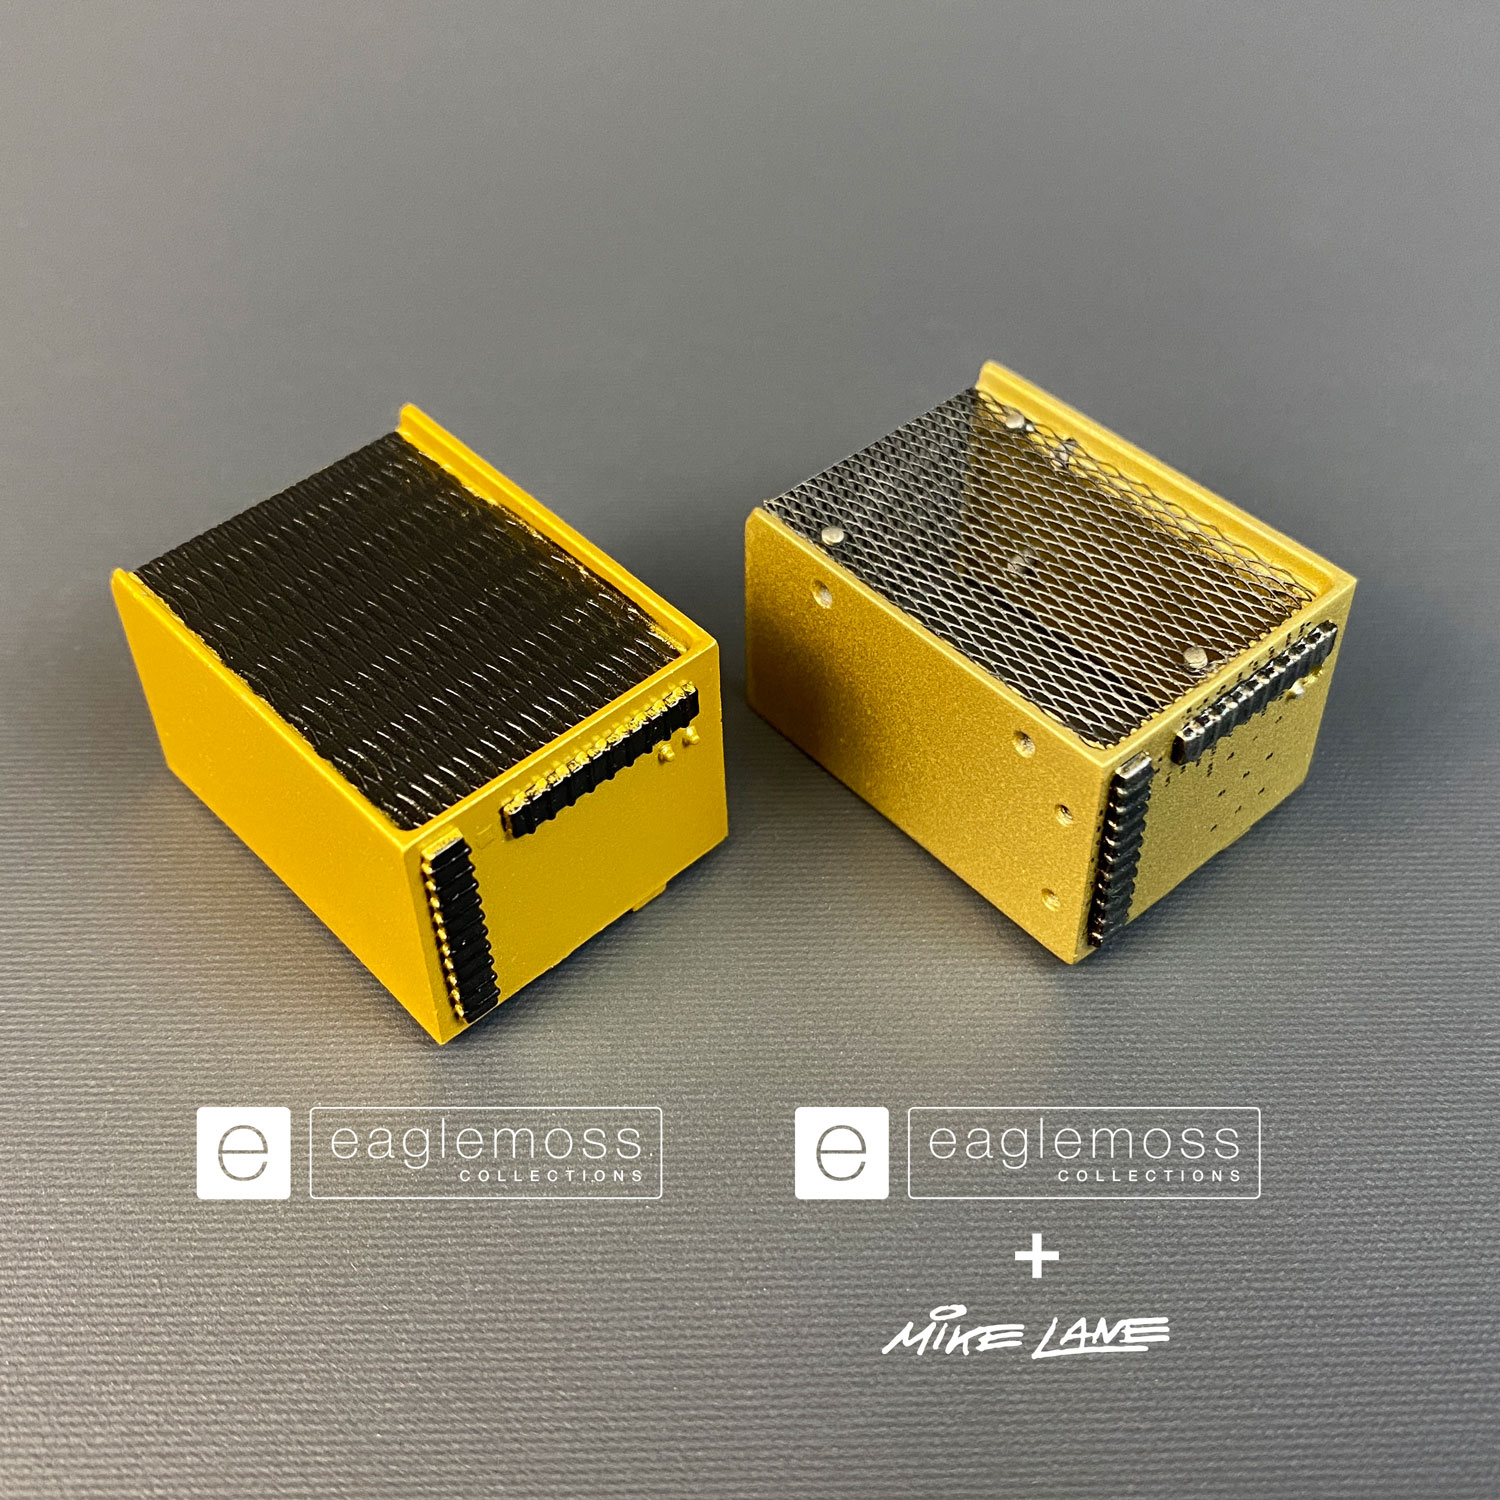 DeLorean Gold Box before and after Mike Lane's mesh mod added